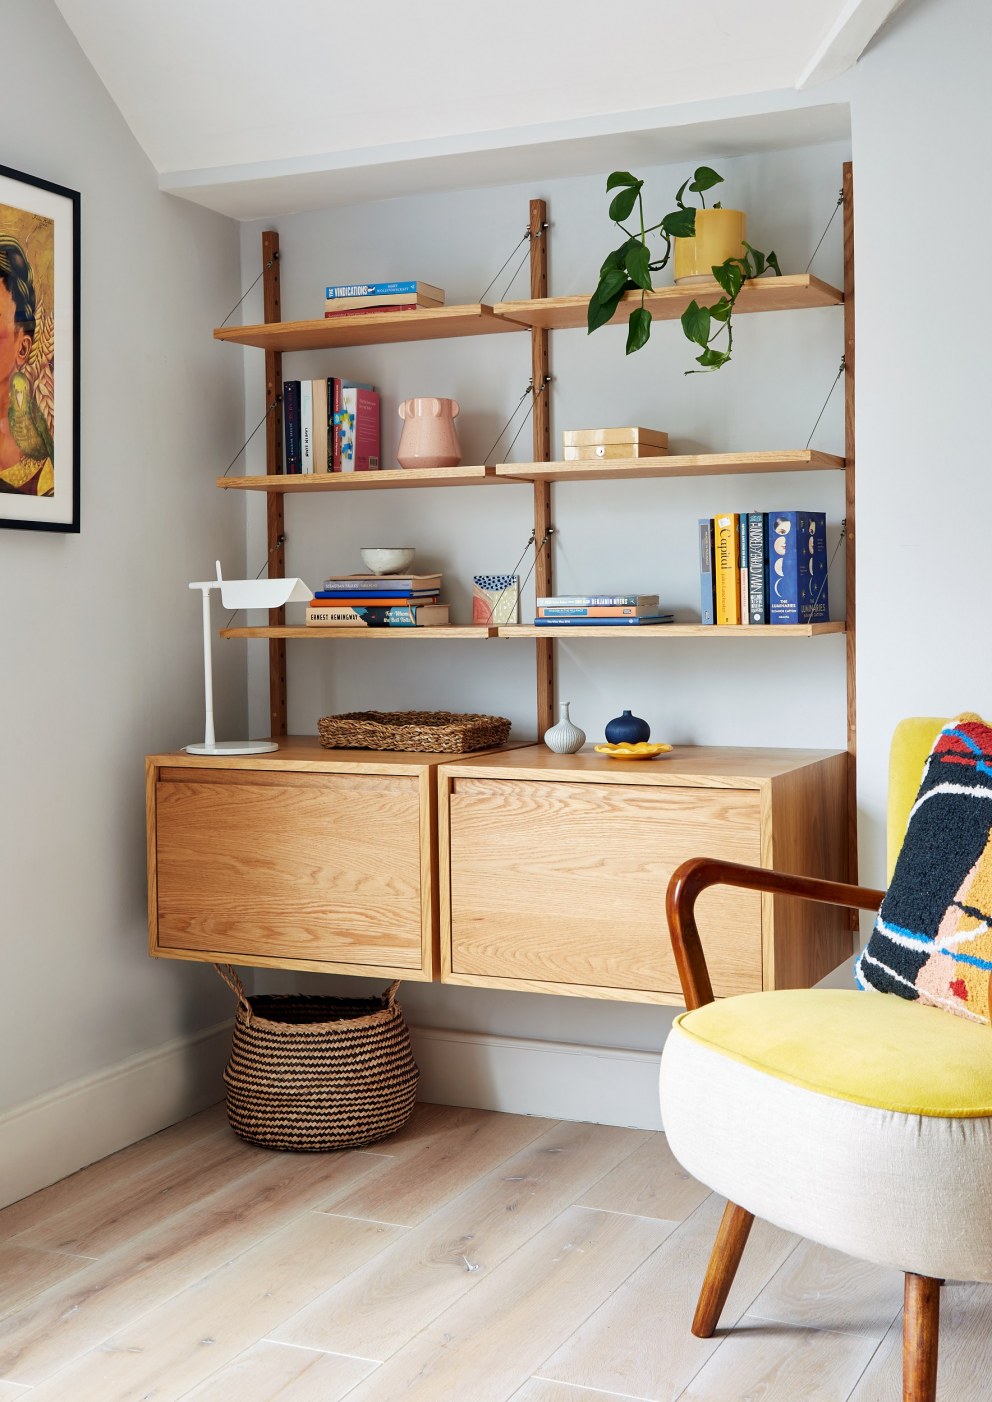 Victorian Terrace, Brockley | Bespoke shelving & bright yellow chair for client's home office | Interior Designers